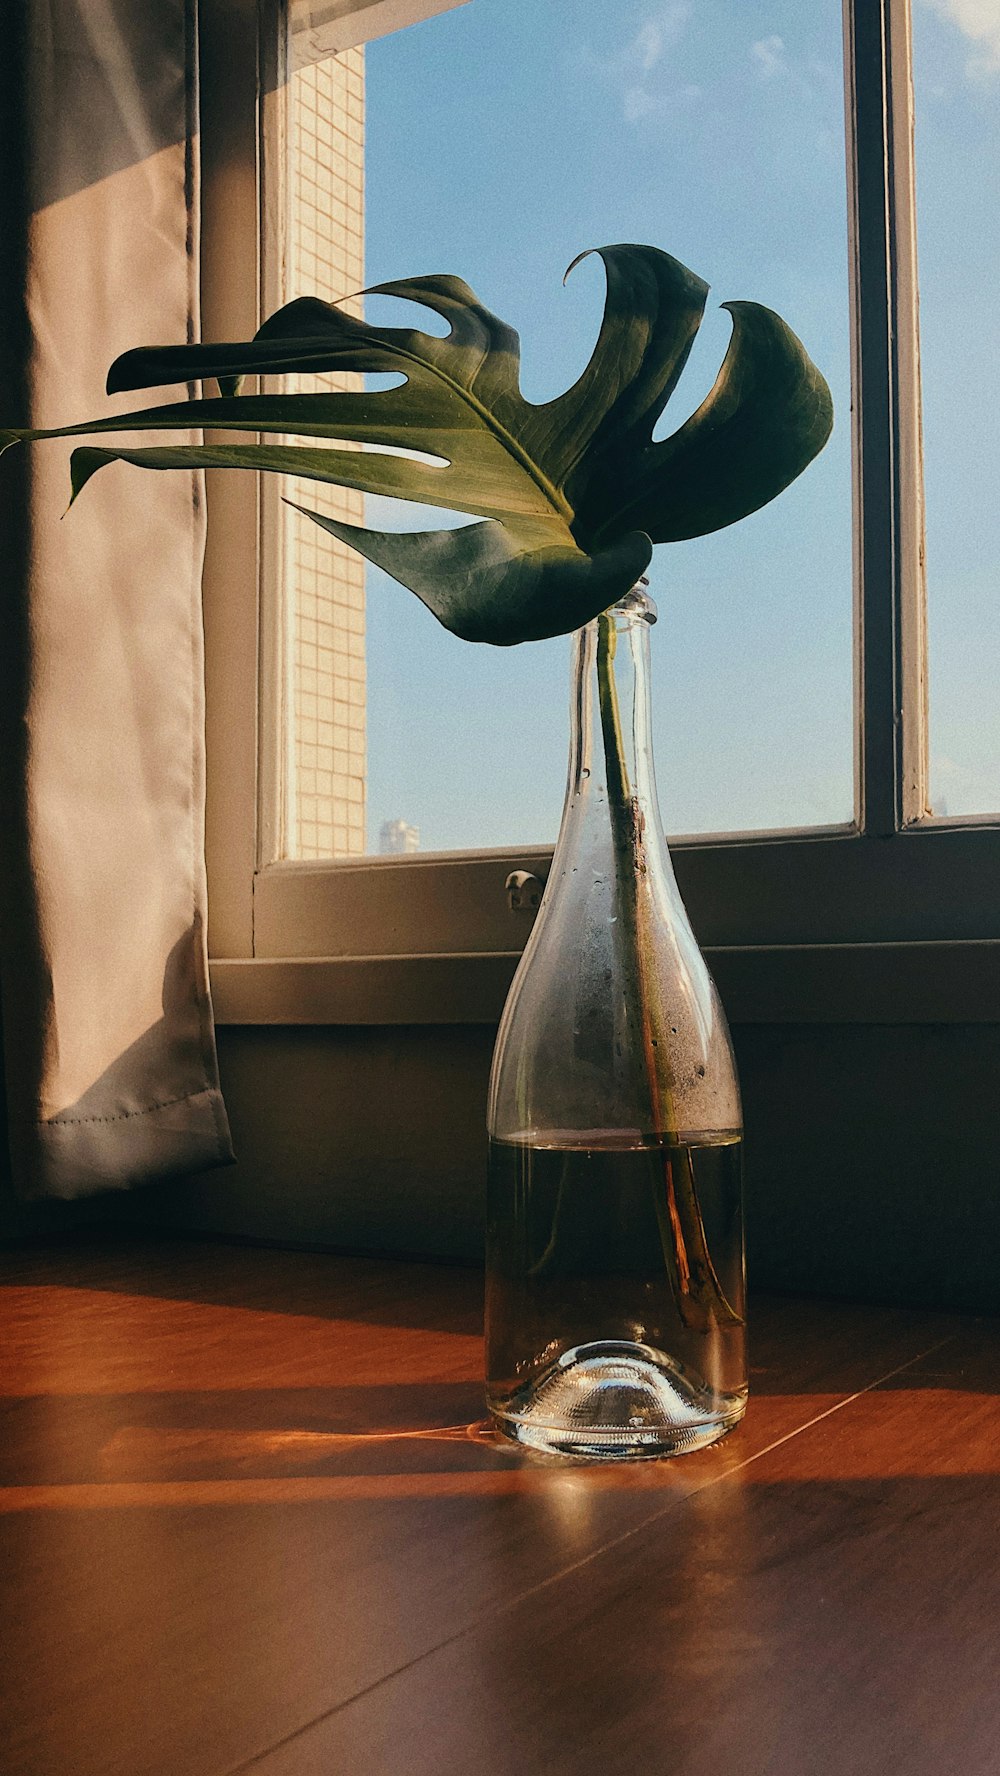 clear glass bottle on brown wooden table